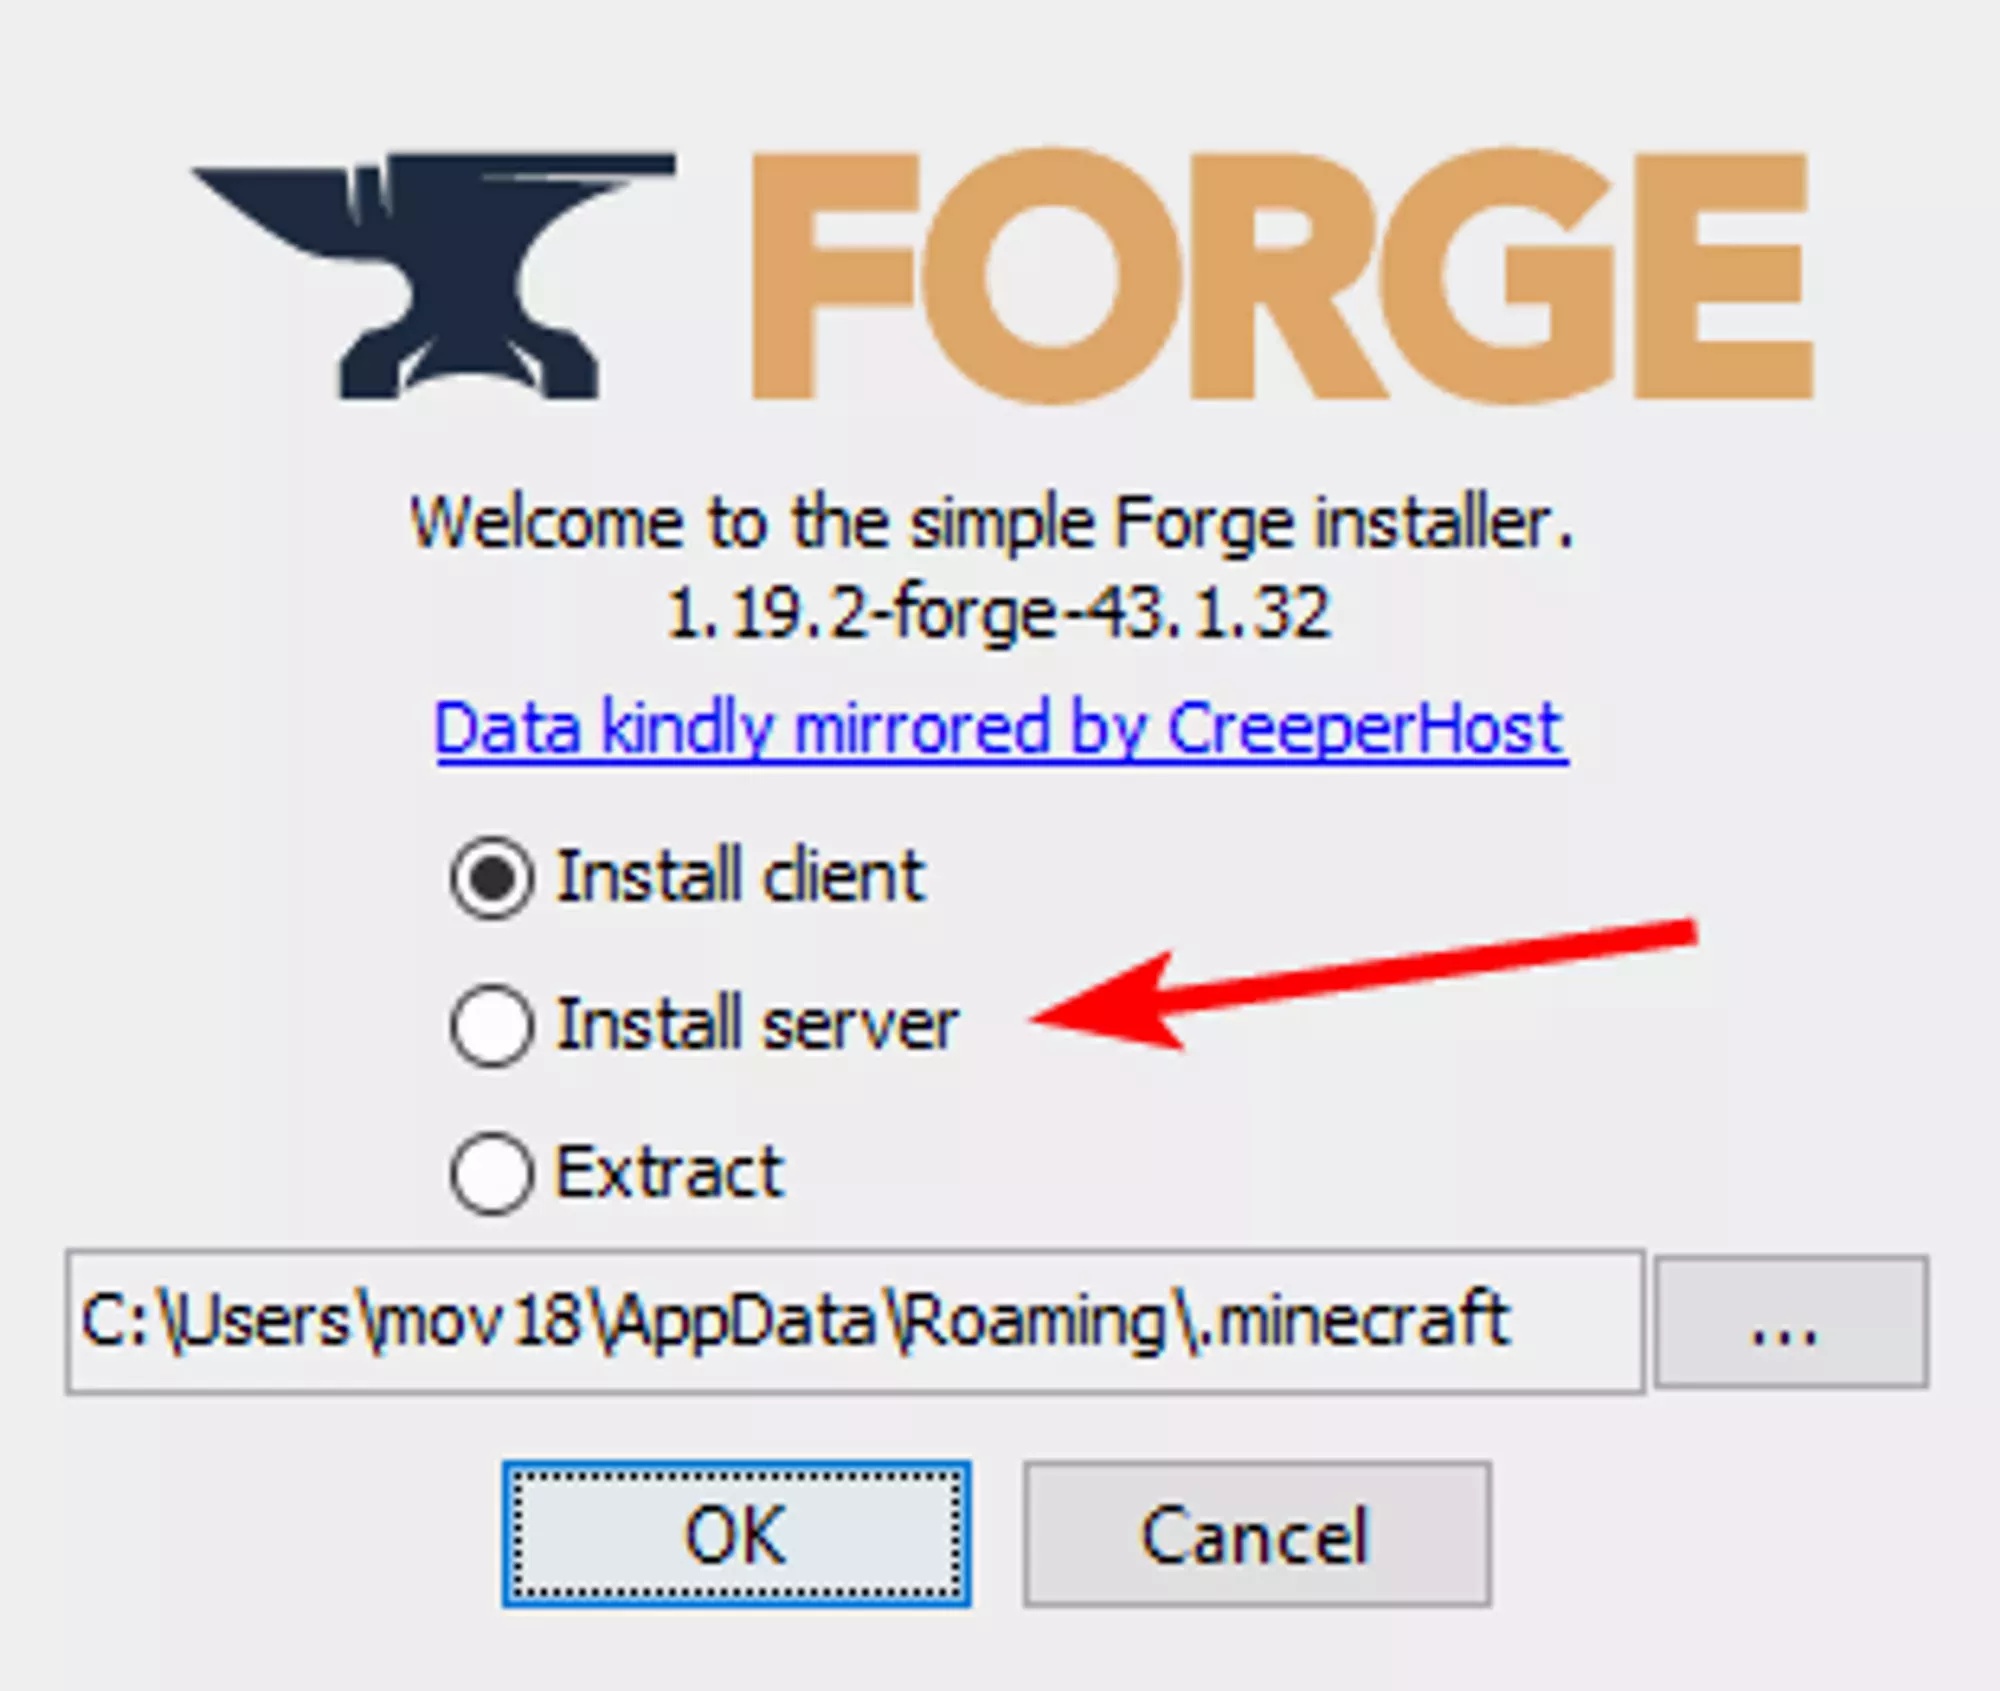 The 2nd option on the Forge Installer titled &quot;Install Server&quot;